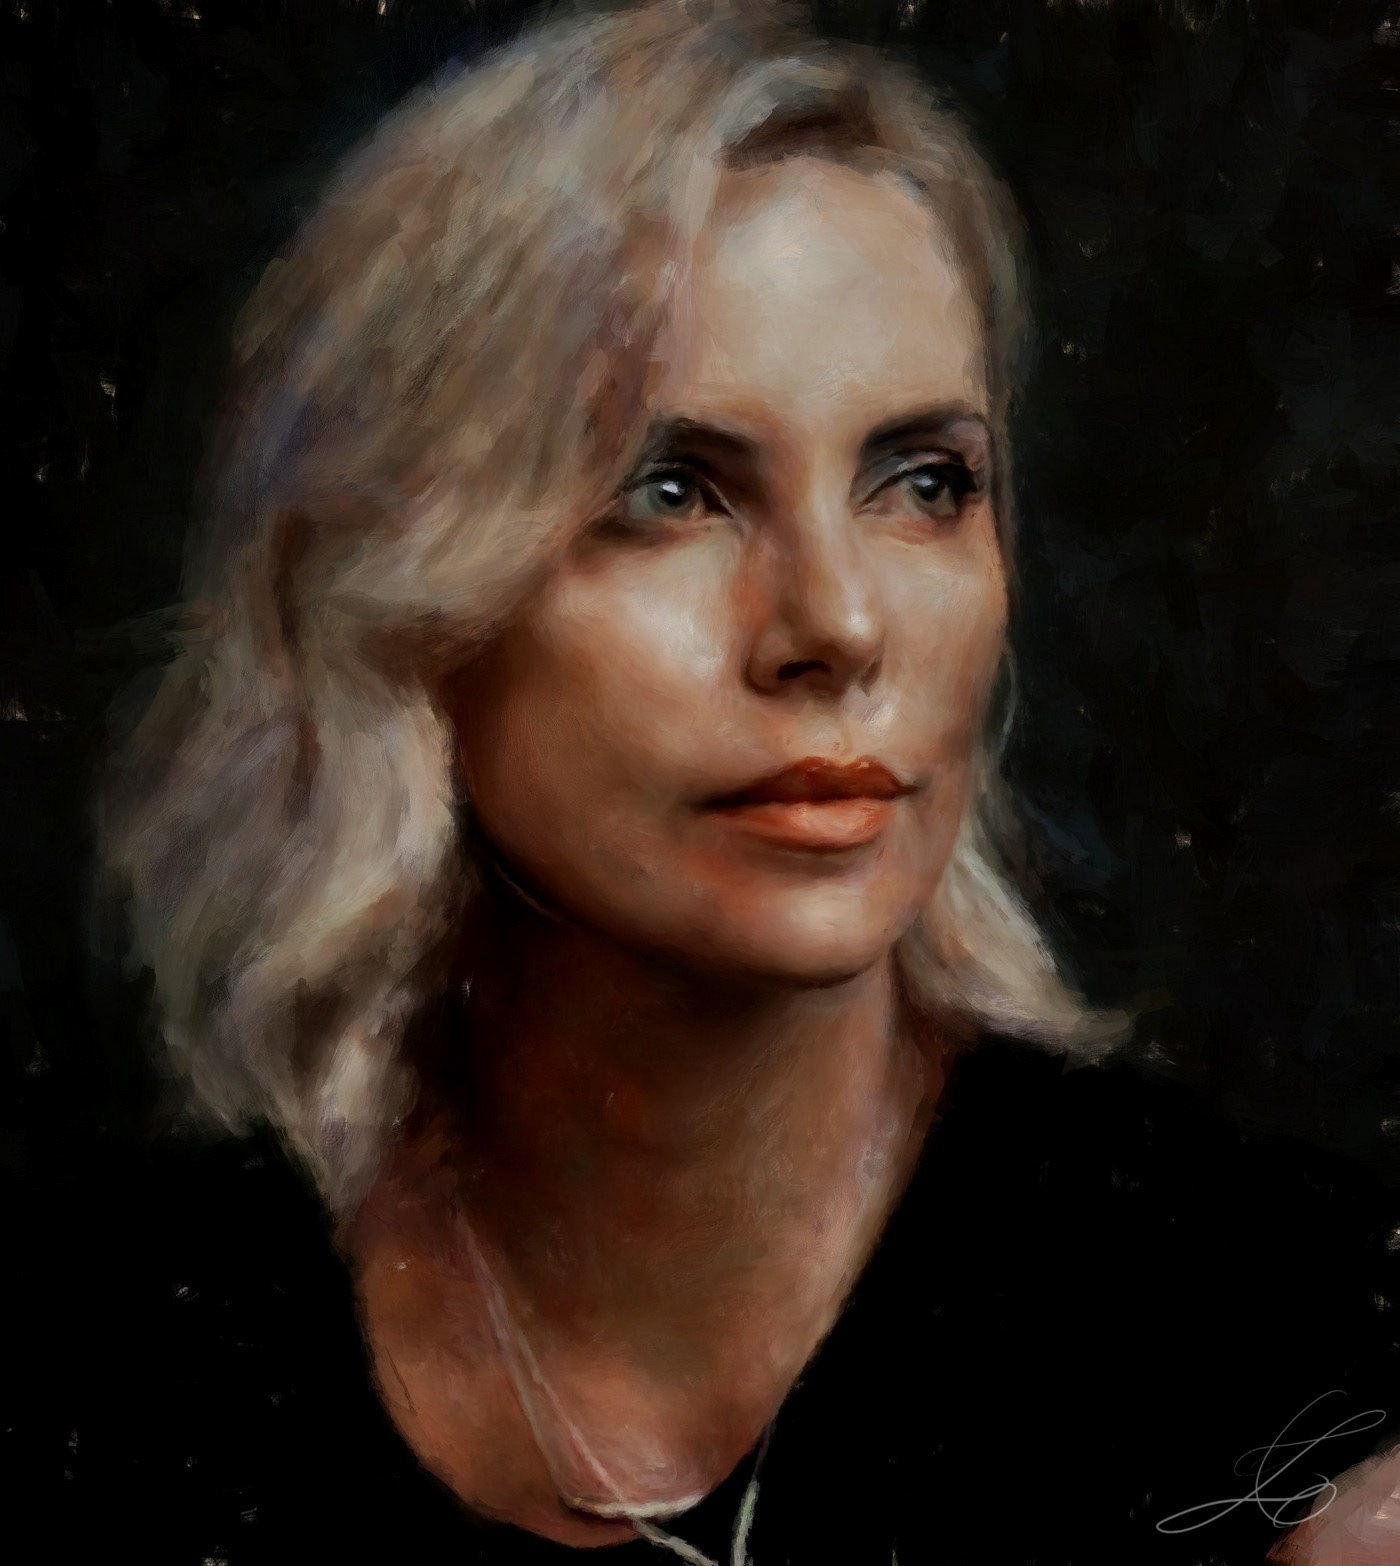 #charlize theron #charlize theron portrait charlize theron movie theron digital portrait